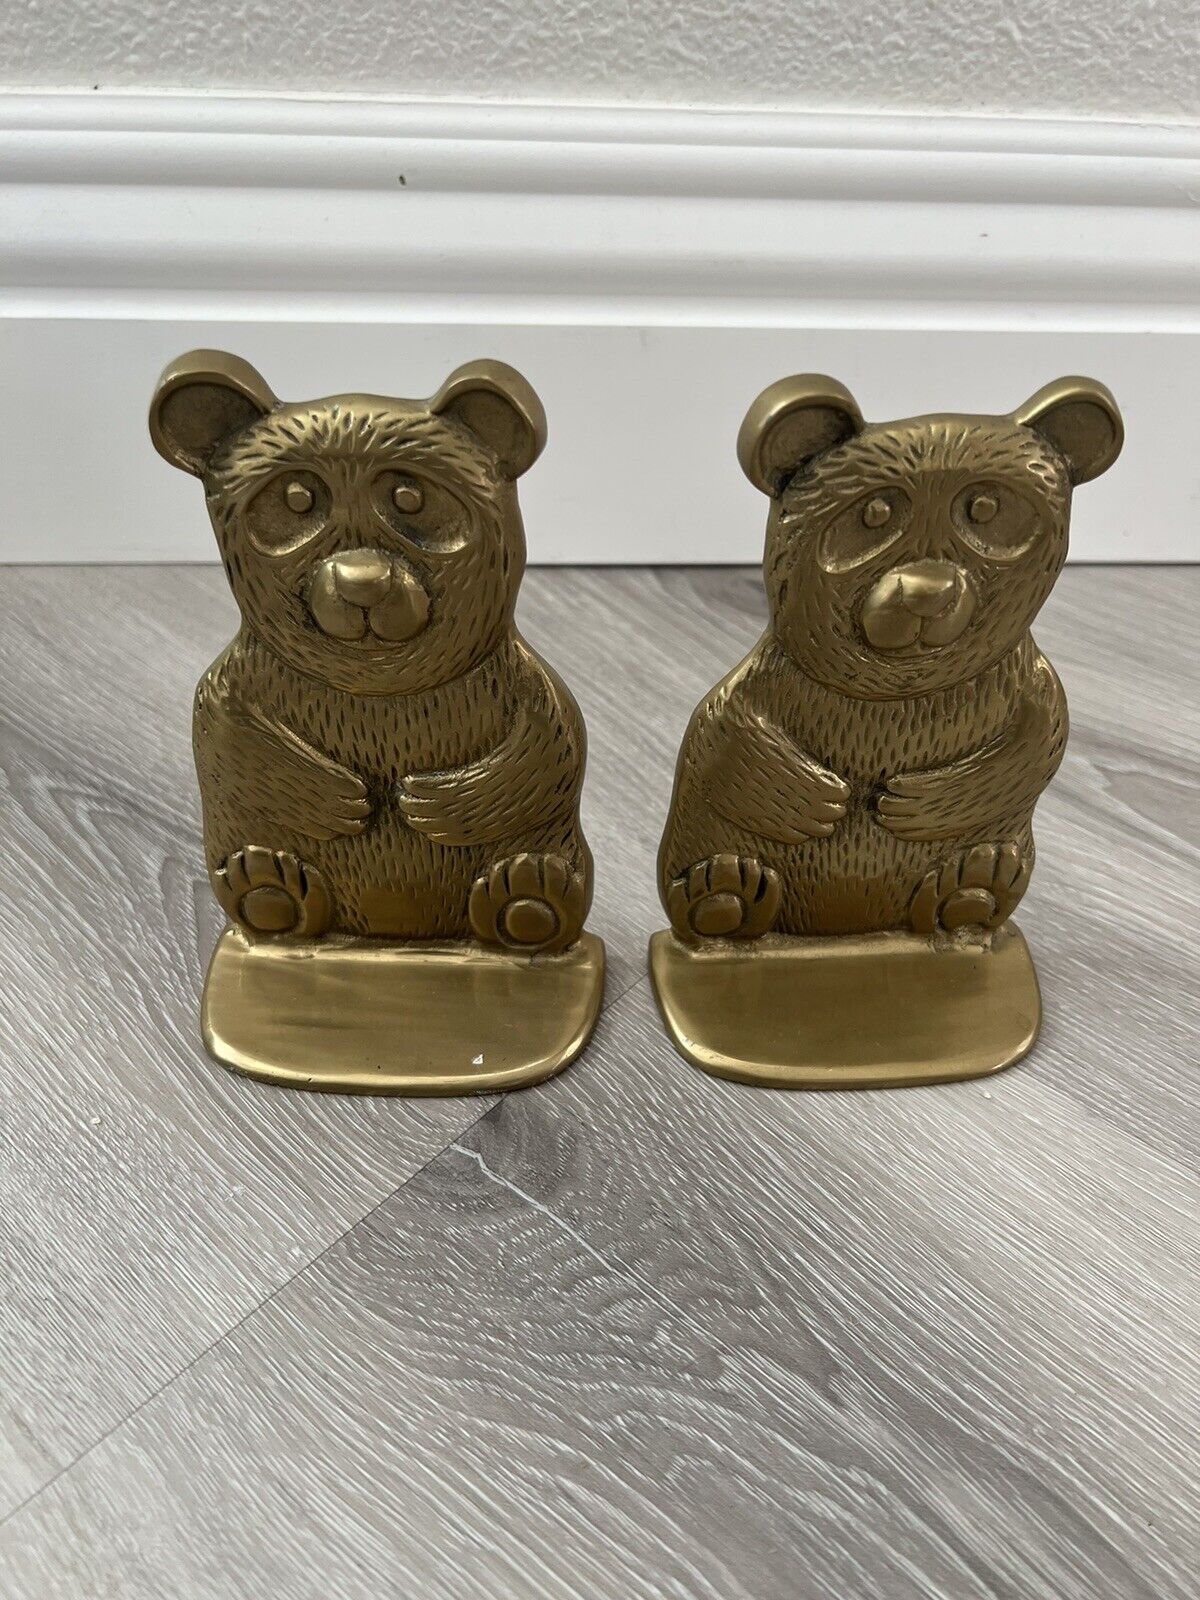 Vintage heavy solid brass panda bookends 